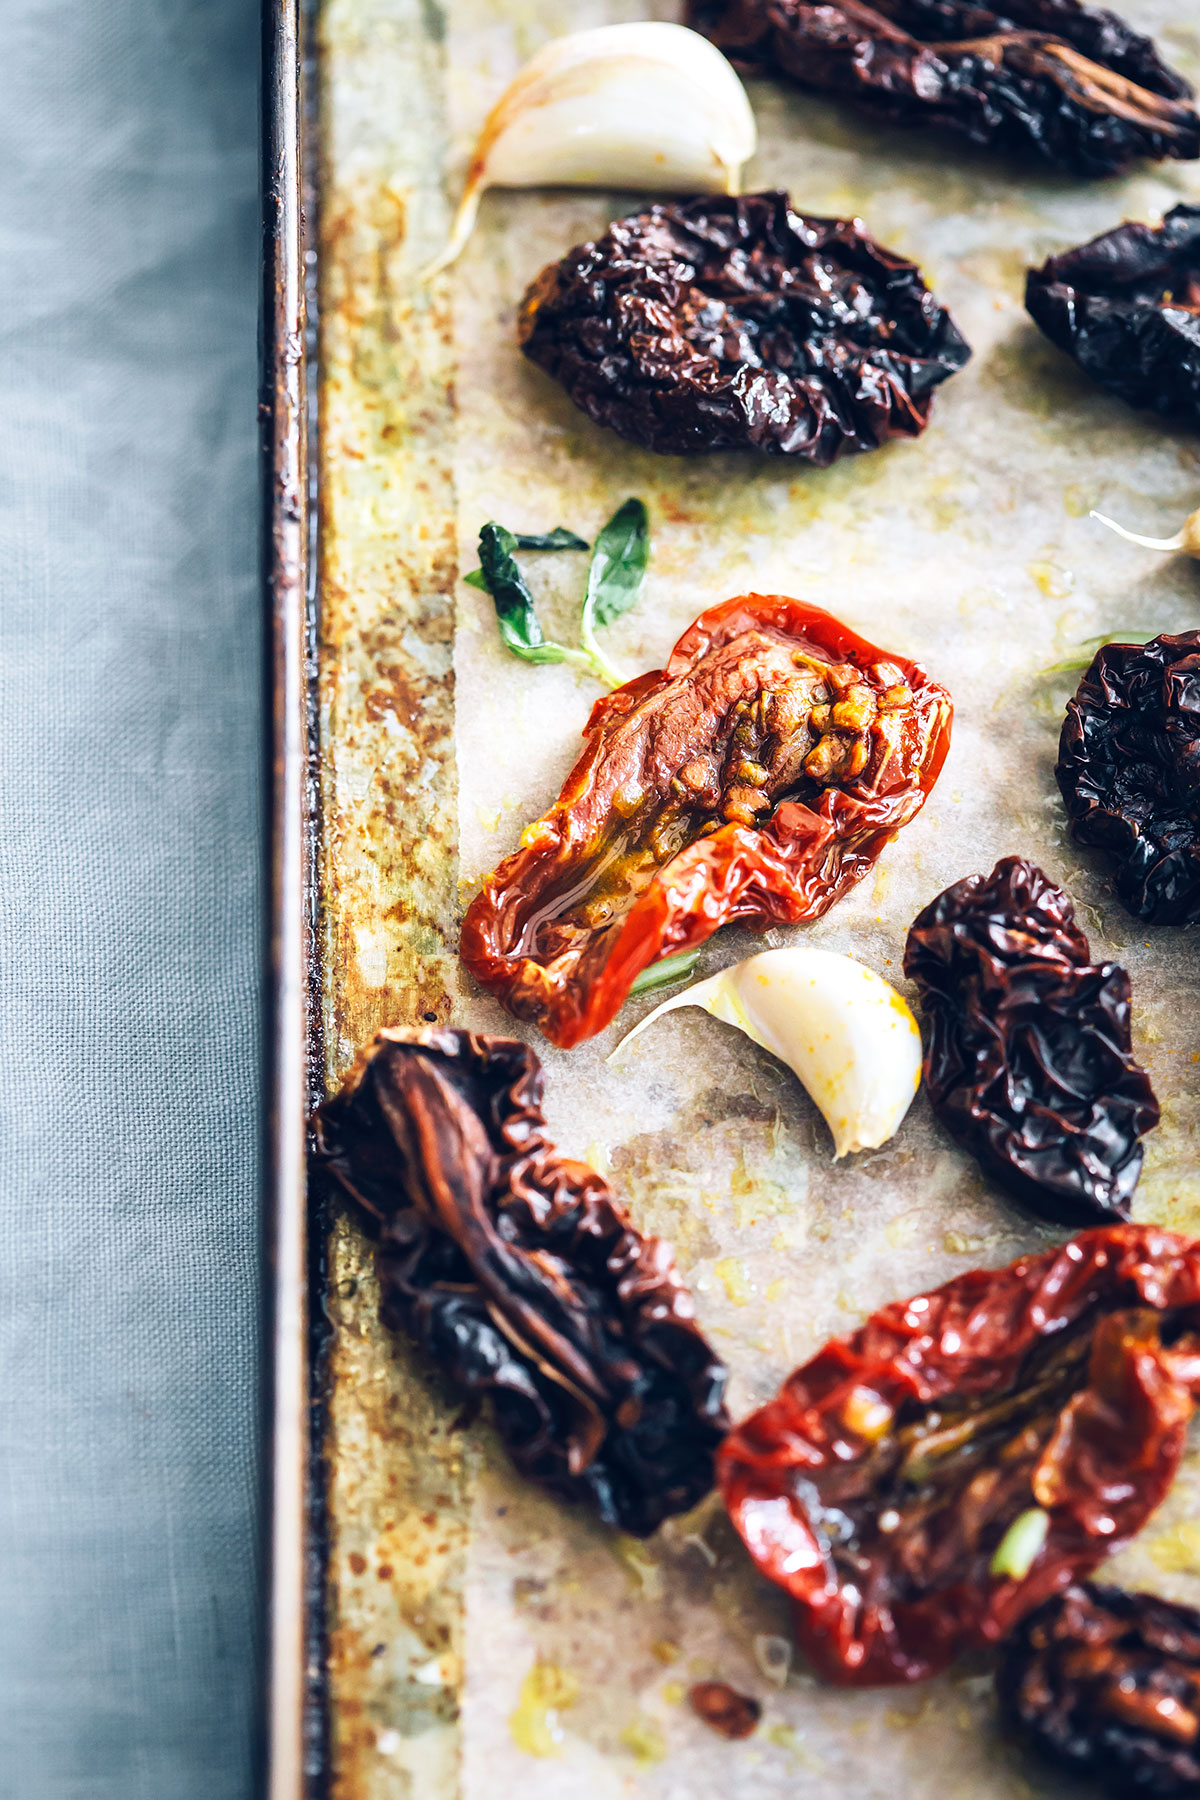 How to Make Your Own Homemade Sun-Dried Tomatoes